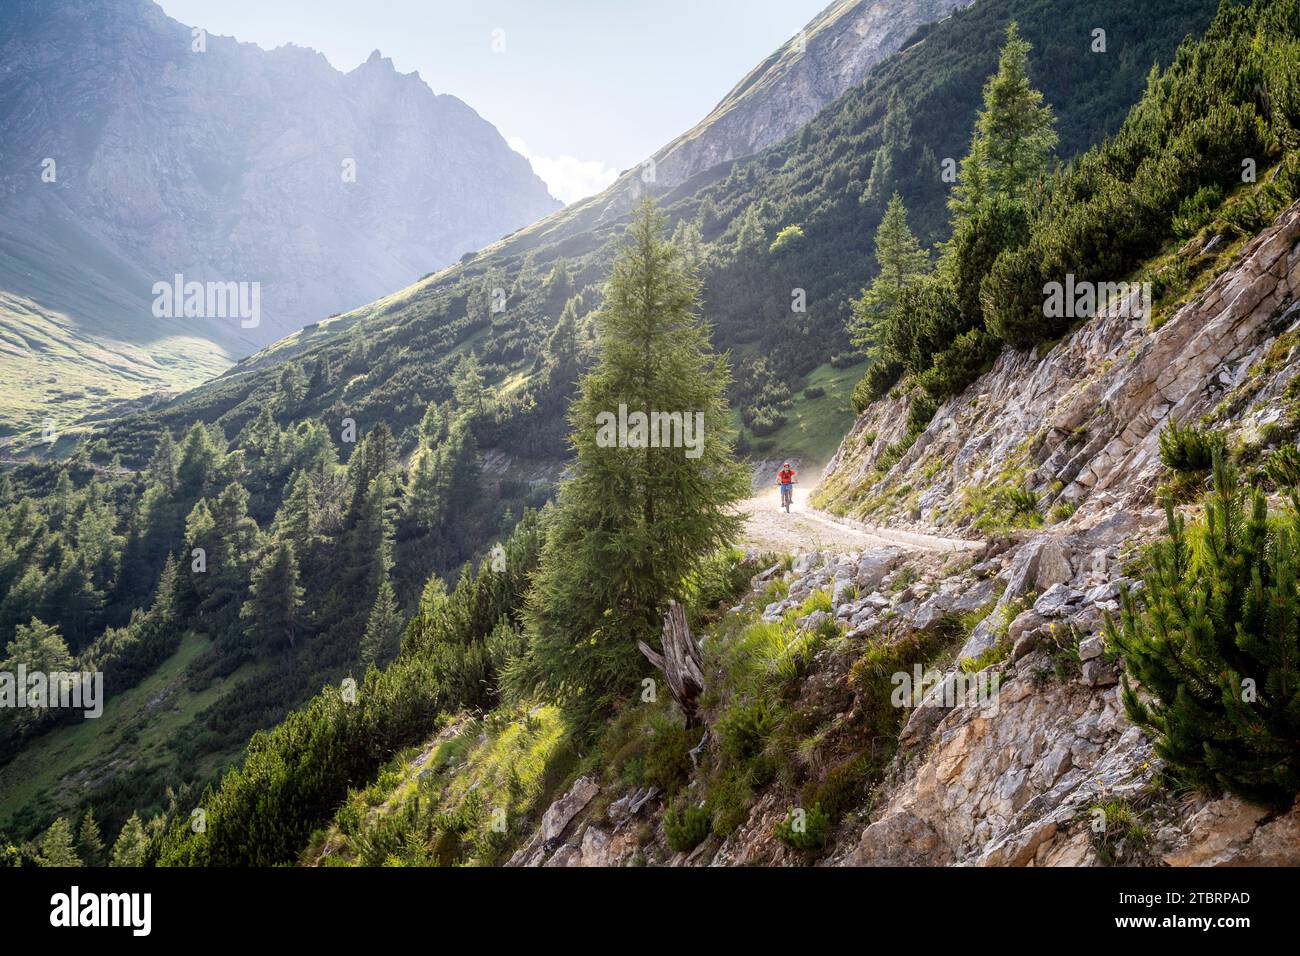 Italy, South Tyrol, province of Bolzano, Val di Vizze / Pfitscher Tal, young rider on a mountain bike along the forest road leading from the Passo della Chiave / Schlüsseljoch Stock Photo